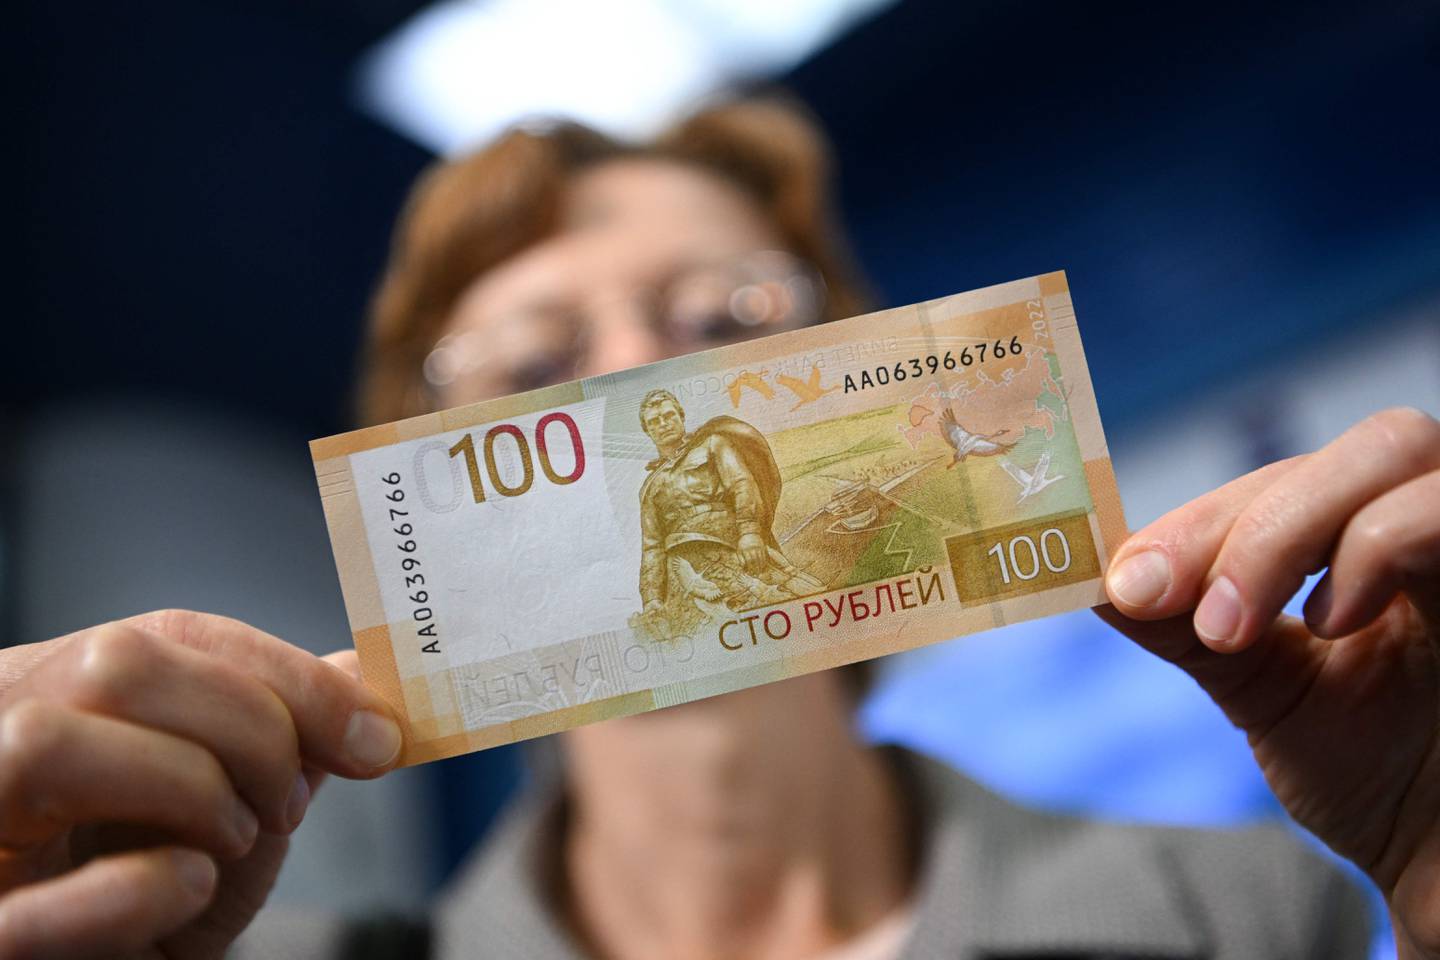 A woman shows an updated version of 100-rubles banknote during the official presentation in Moscow on June 30, 2022. (Photo by Natalia KOLESNIKOVA / AFP)